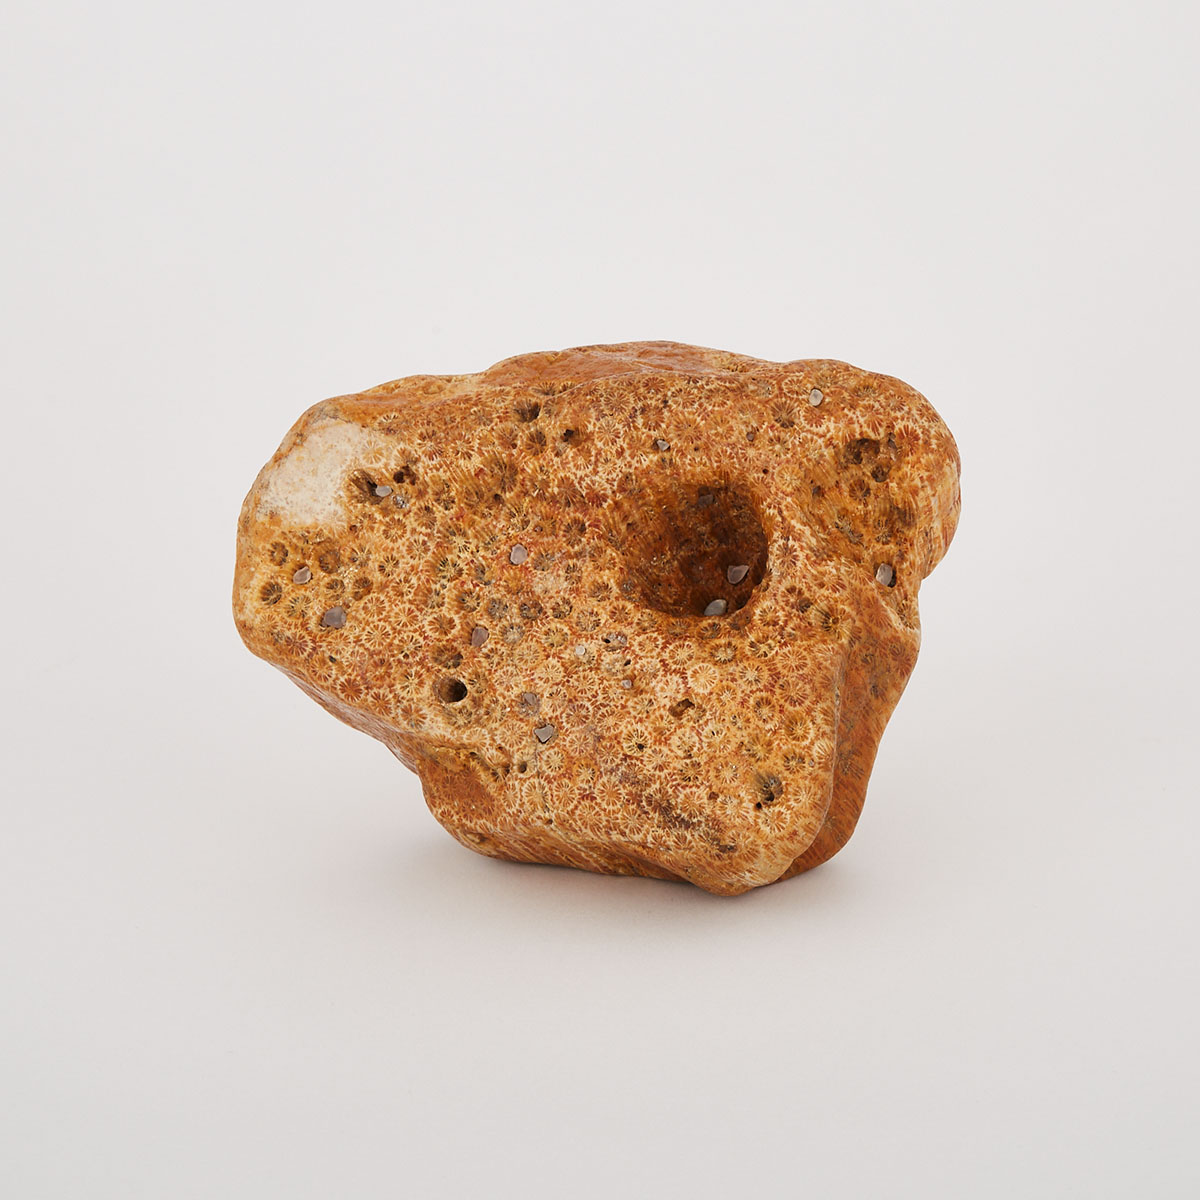 A Fossilized Coral Fragment